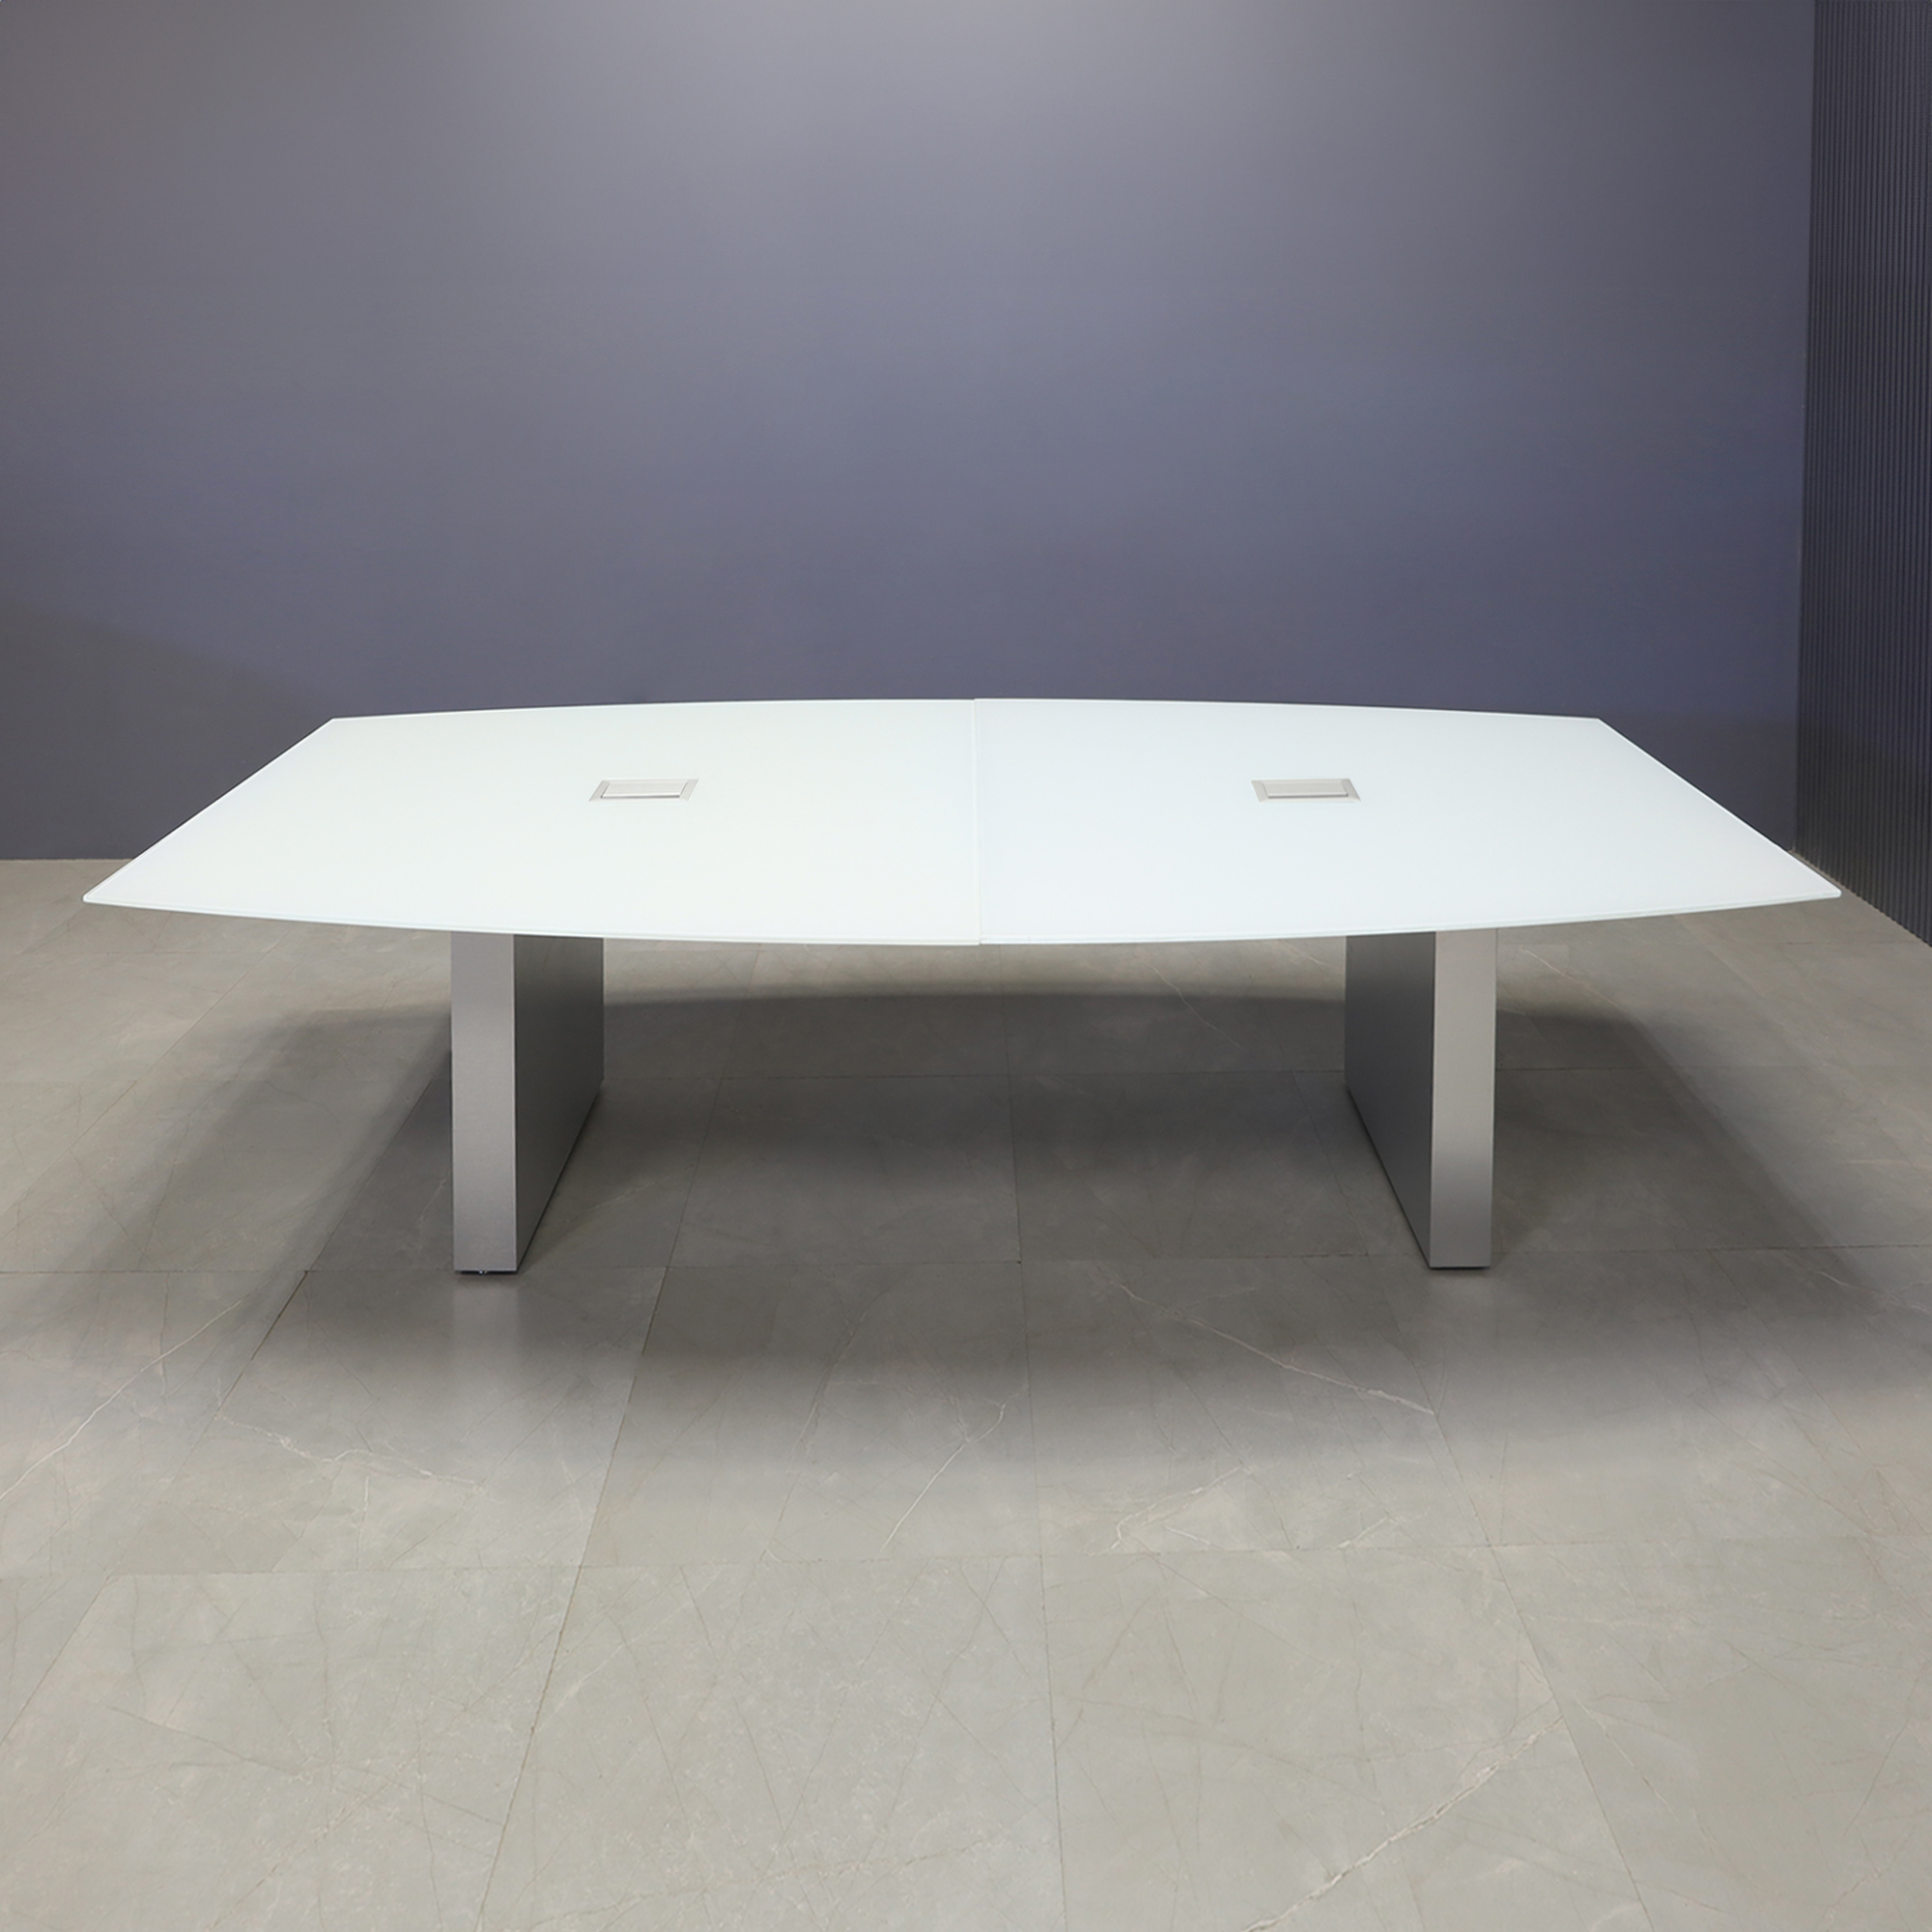 120-inch Omaha Boat Conference Table in 1/2